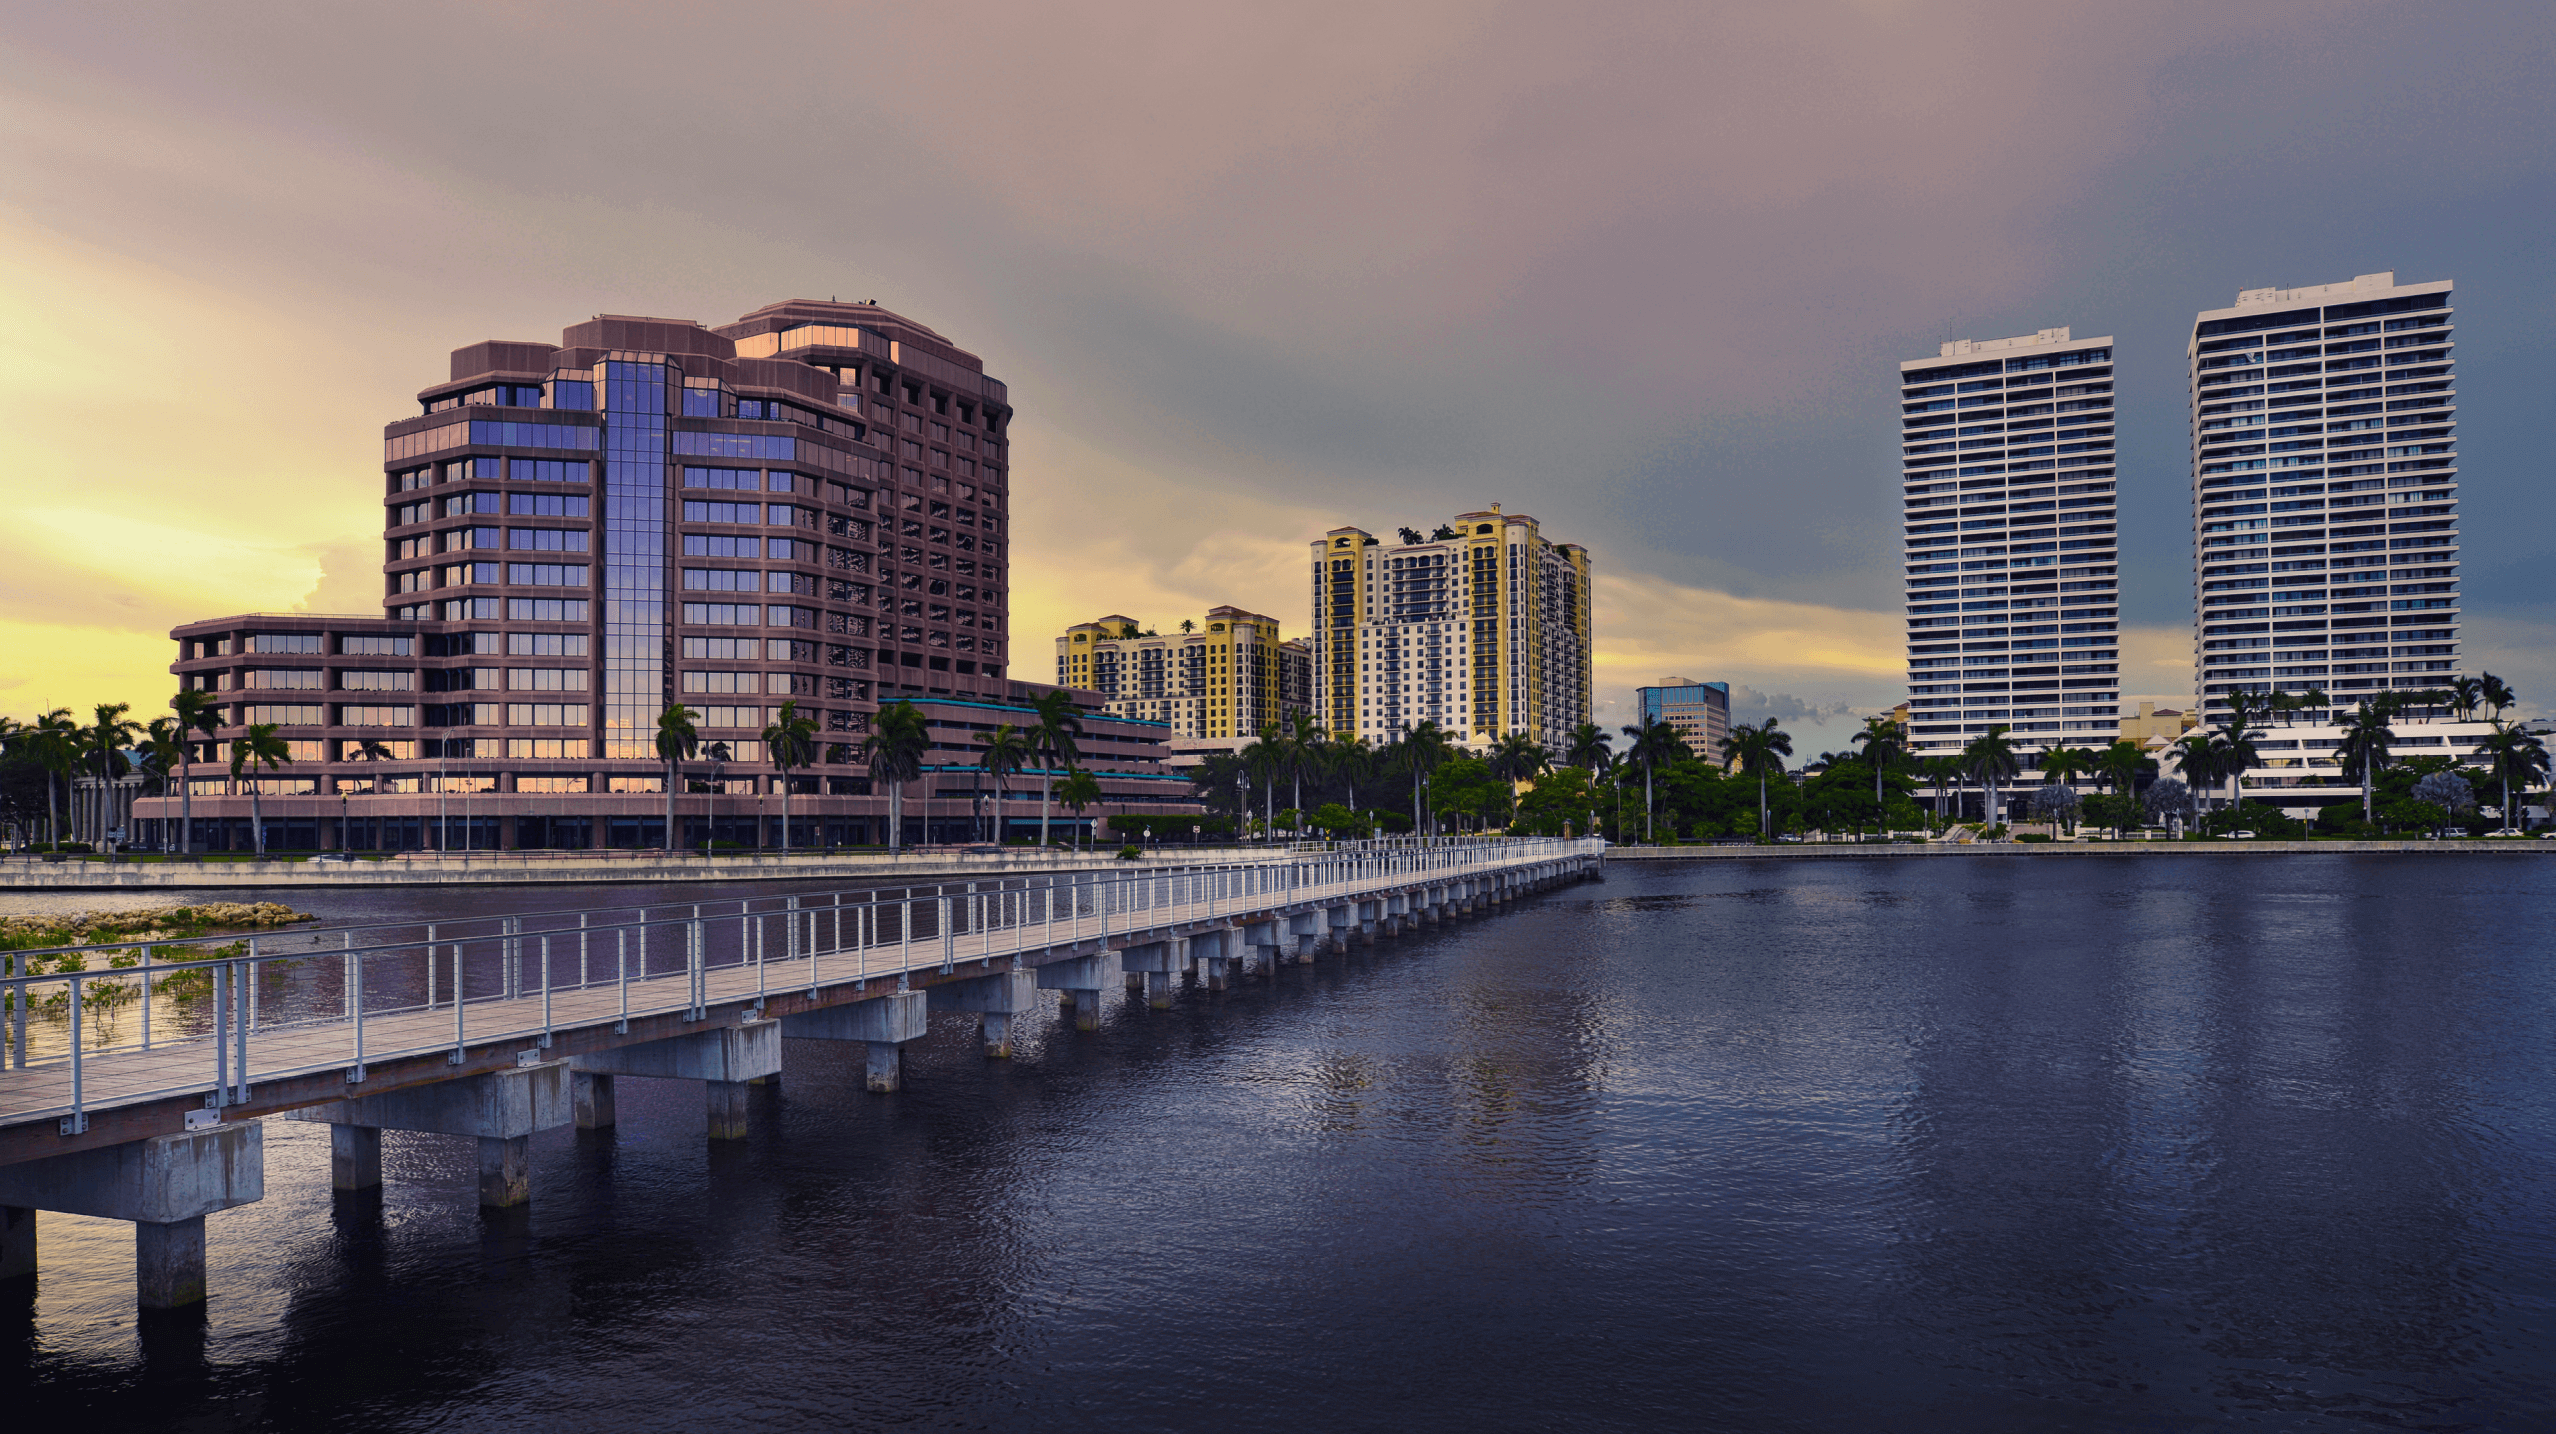 Downtown West Palm Beach buildings with a pier in the foreground.